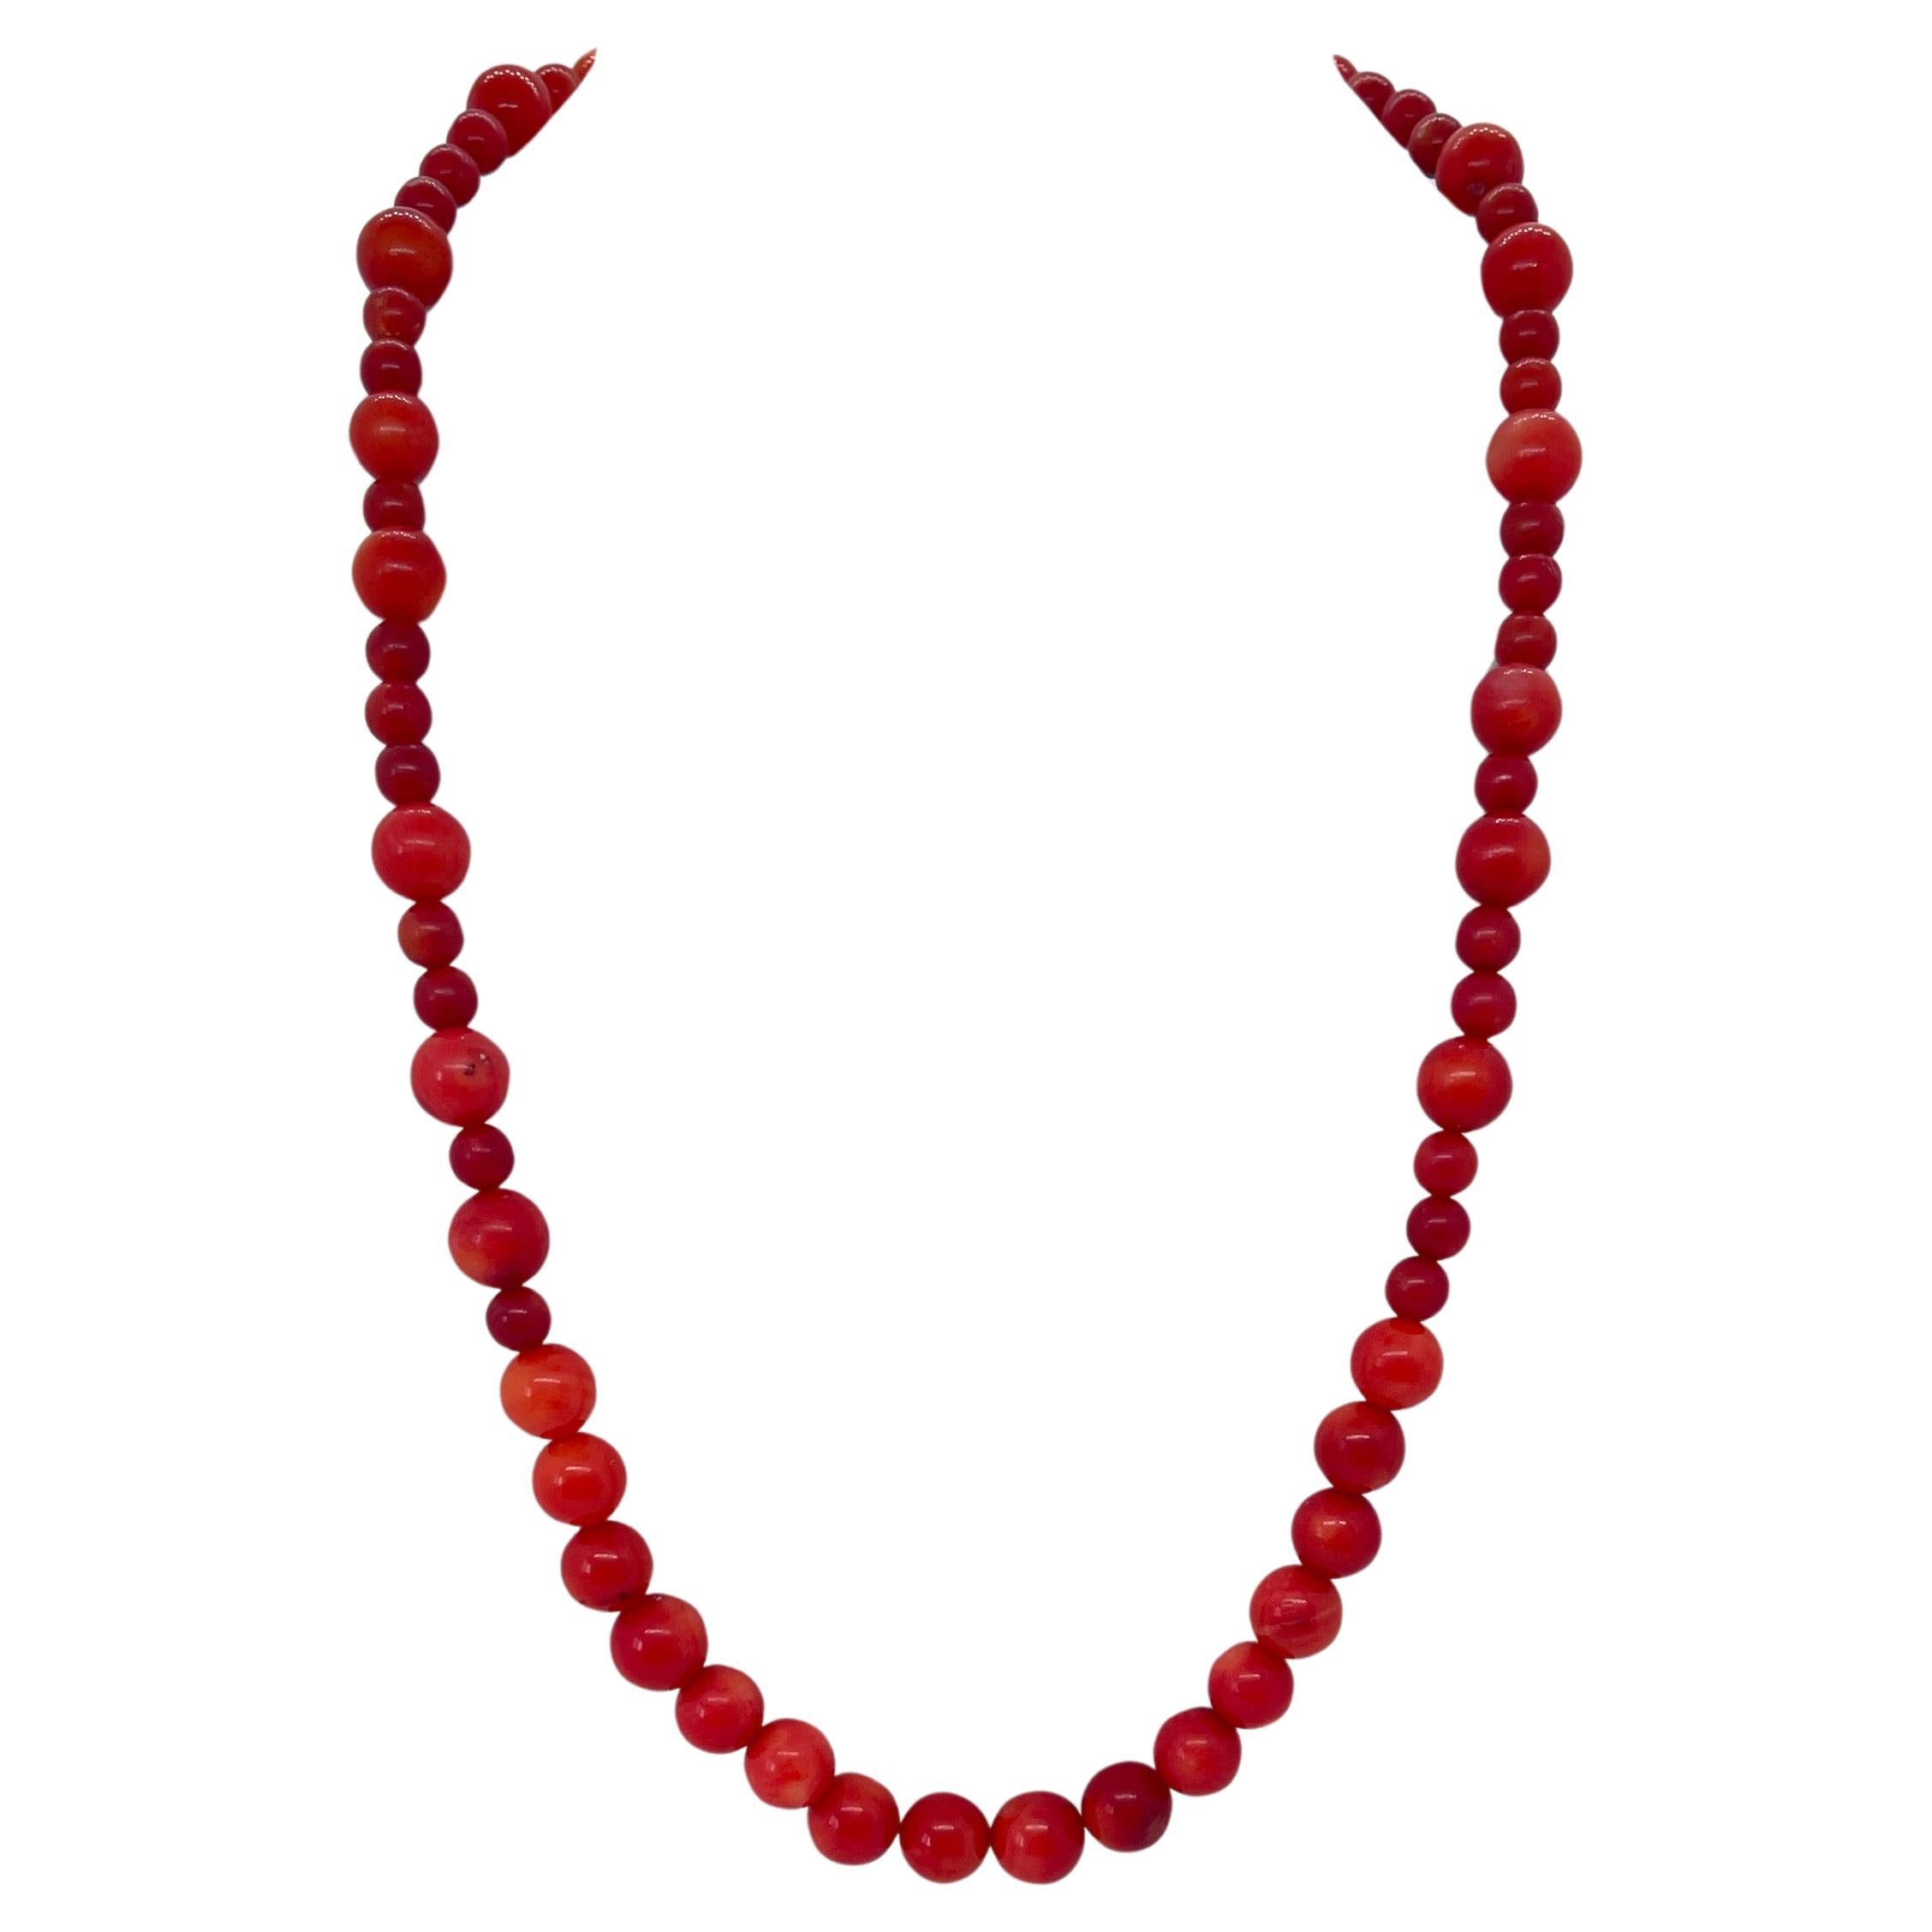 Vintage Graduating Genuine Red Coral Bead Strand Necklace Circa 1950s For Sale